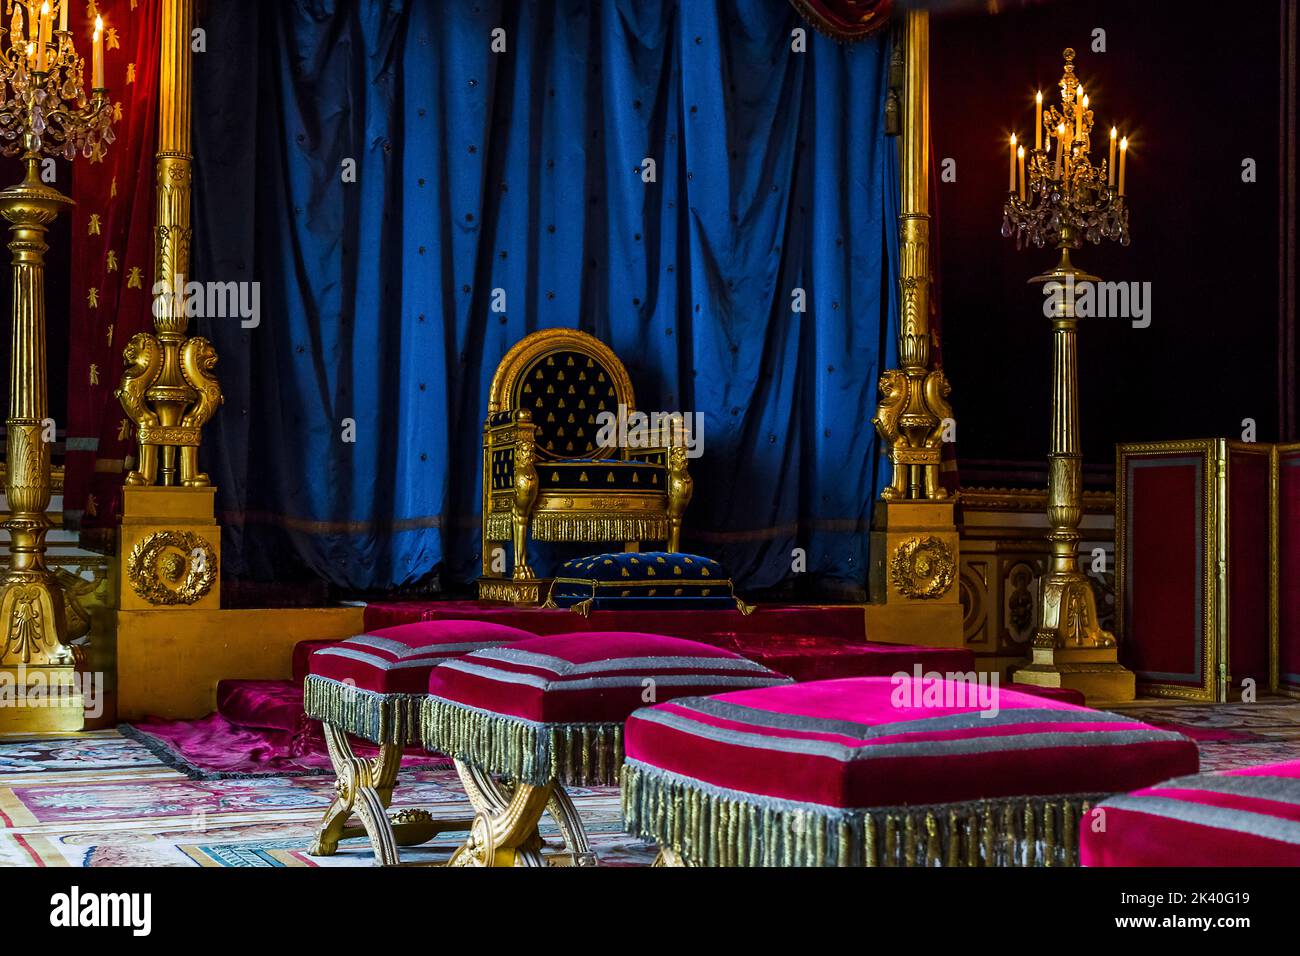 FONTAINBLEAU, FRANCE - MAY 16, 2015: This is the throne room of Napoleon Bonaparte in castle Fontainbleau. Stock Photo